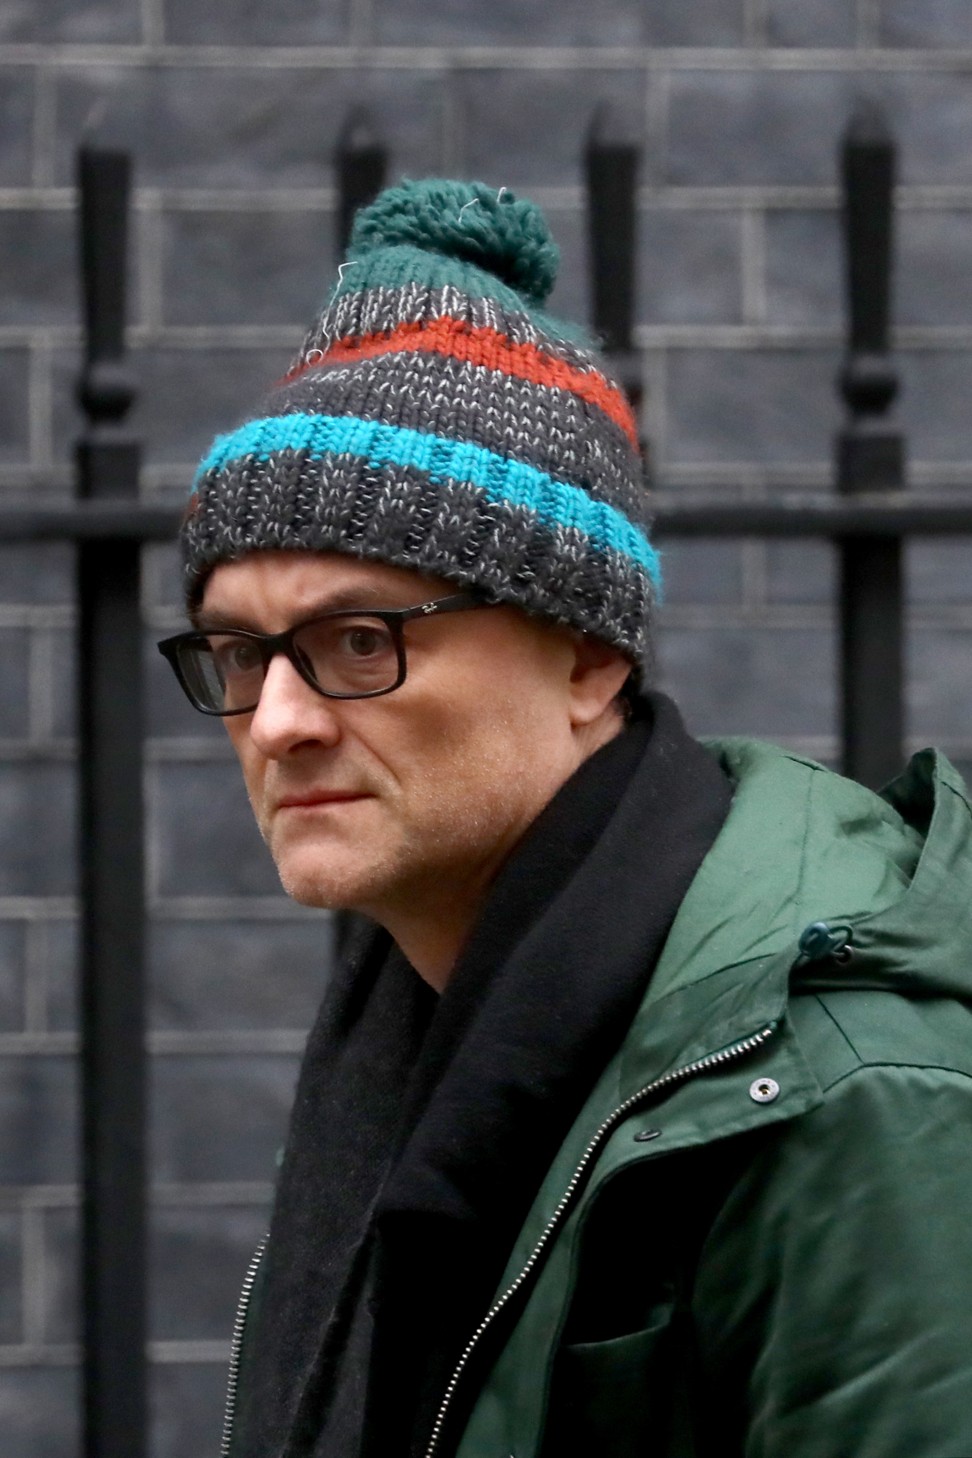 Dominic Cummings, a special adviser for Prime Minister Boris Johnson, reportedly wants to know which government advisers have been spotted meeting with journalists. Photo: Reuters